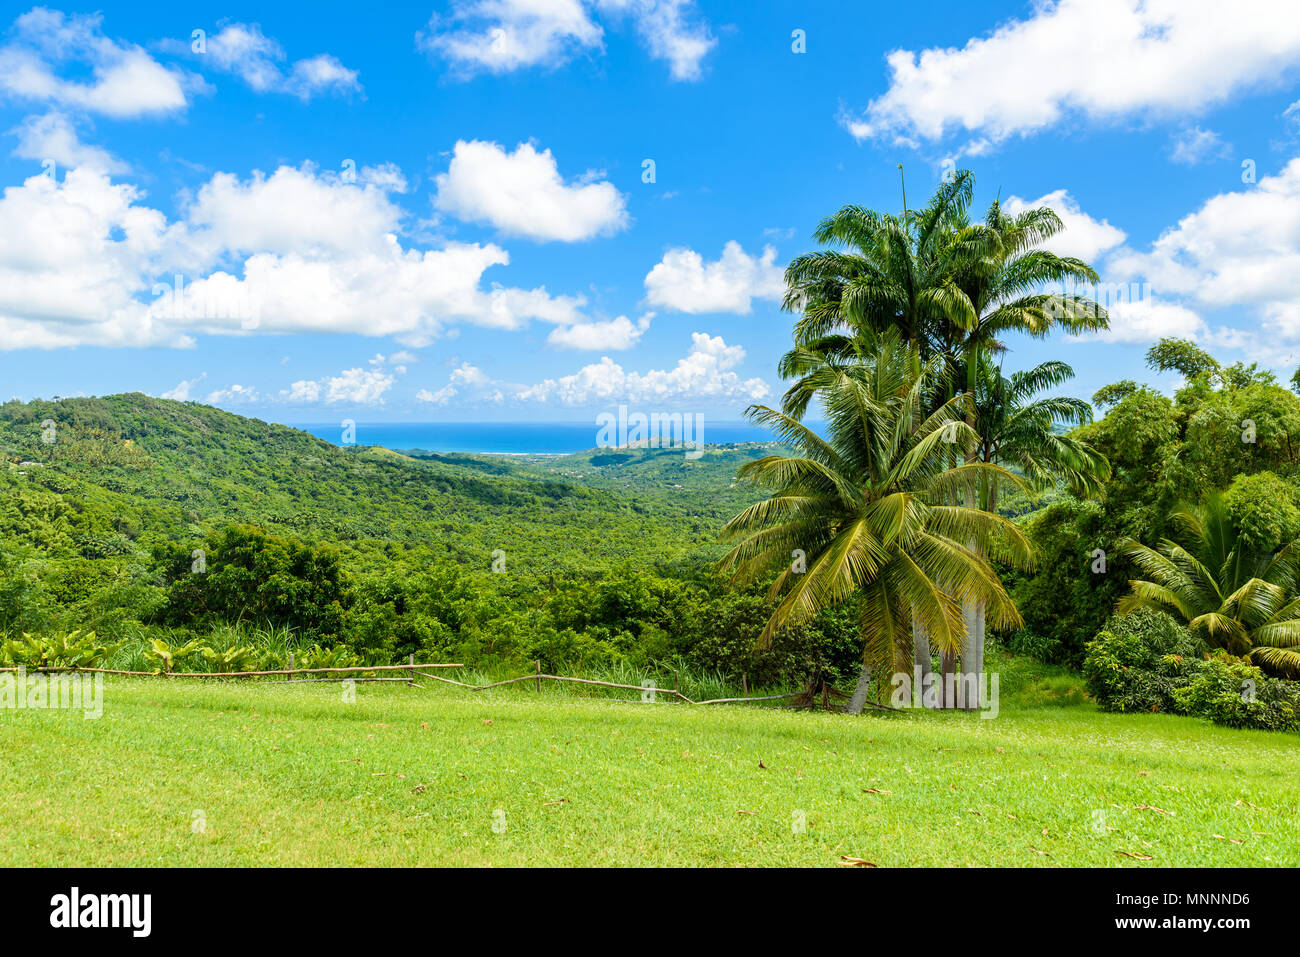 Tropical highland scenery on the Caribbean island of Barbados. It is a paradise destination with a white sand beach and turquoiuse sea. Stock Photo